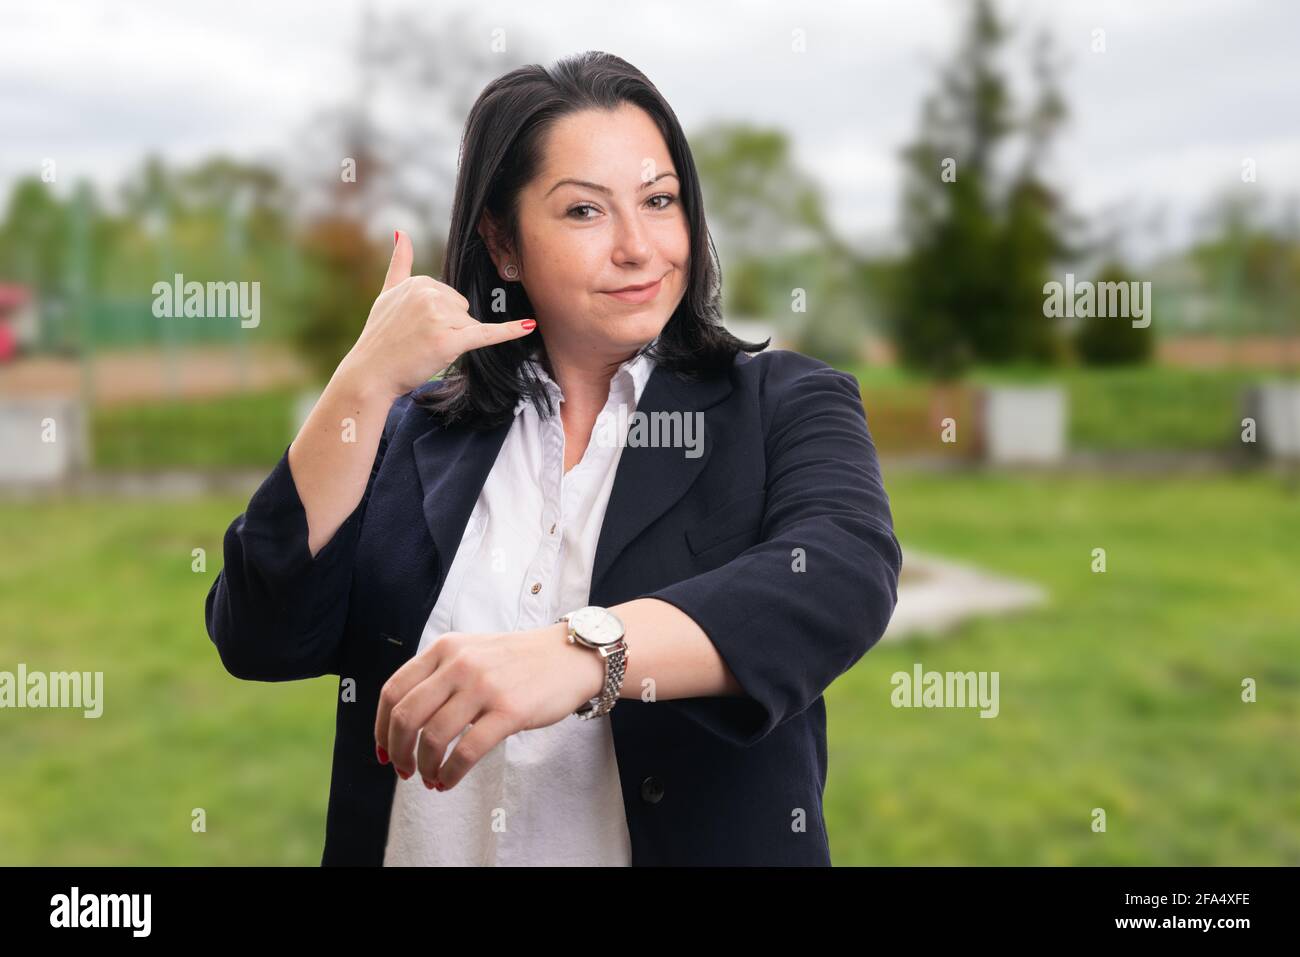 Corporate woman entrepreneur wearing suit smiling making calling gesture with fingers showing watch on wrist as telephone marketing concept in park na Stock Photo